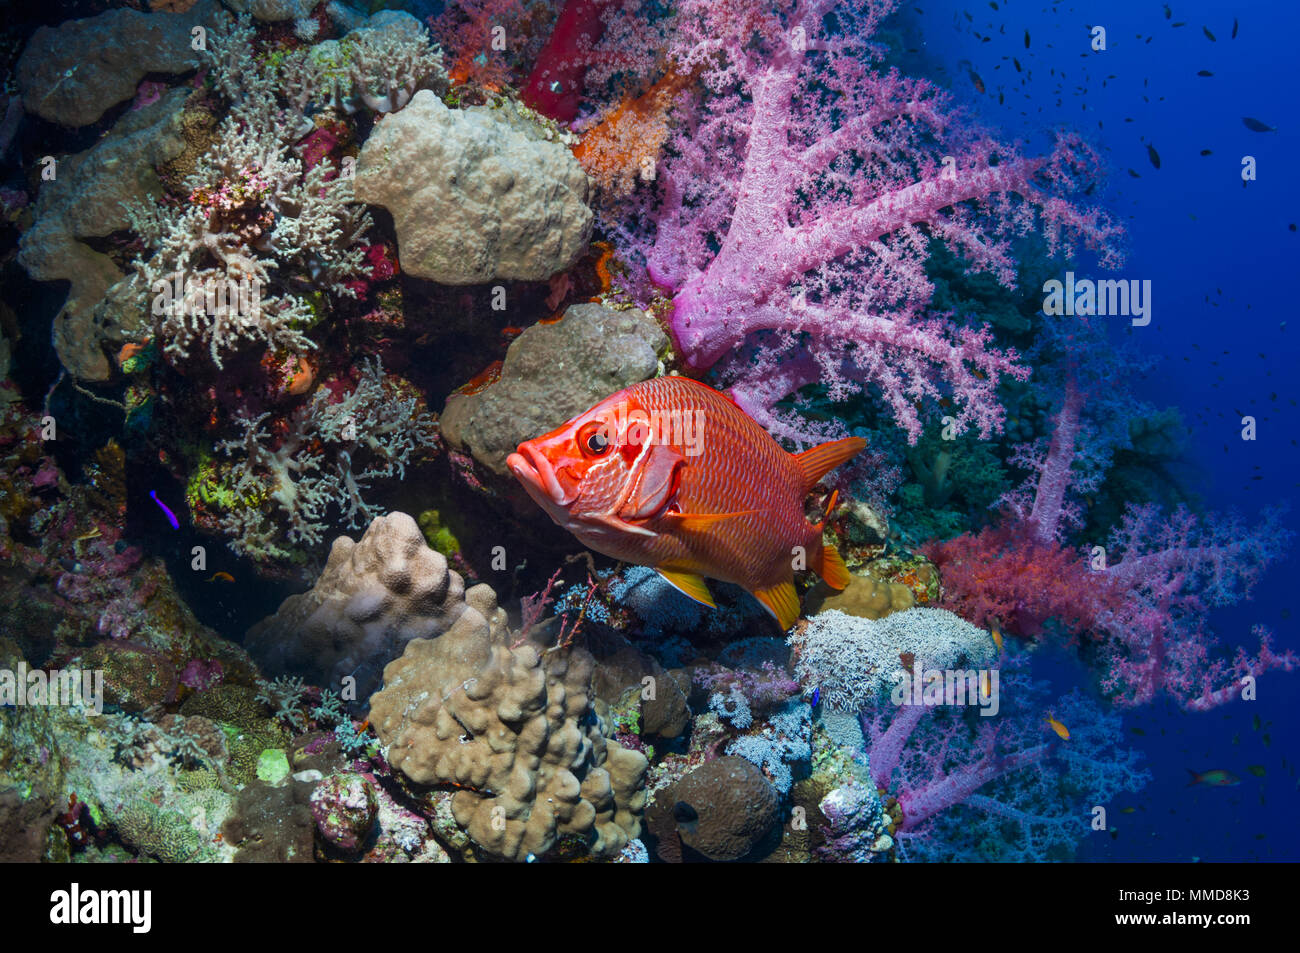 Sabre squirrelfish [Sargocentron spiniferum] with soft coral [Dendronephthya sp.] on reef wall.  Egypt, Red Sea. Stock Photo